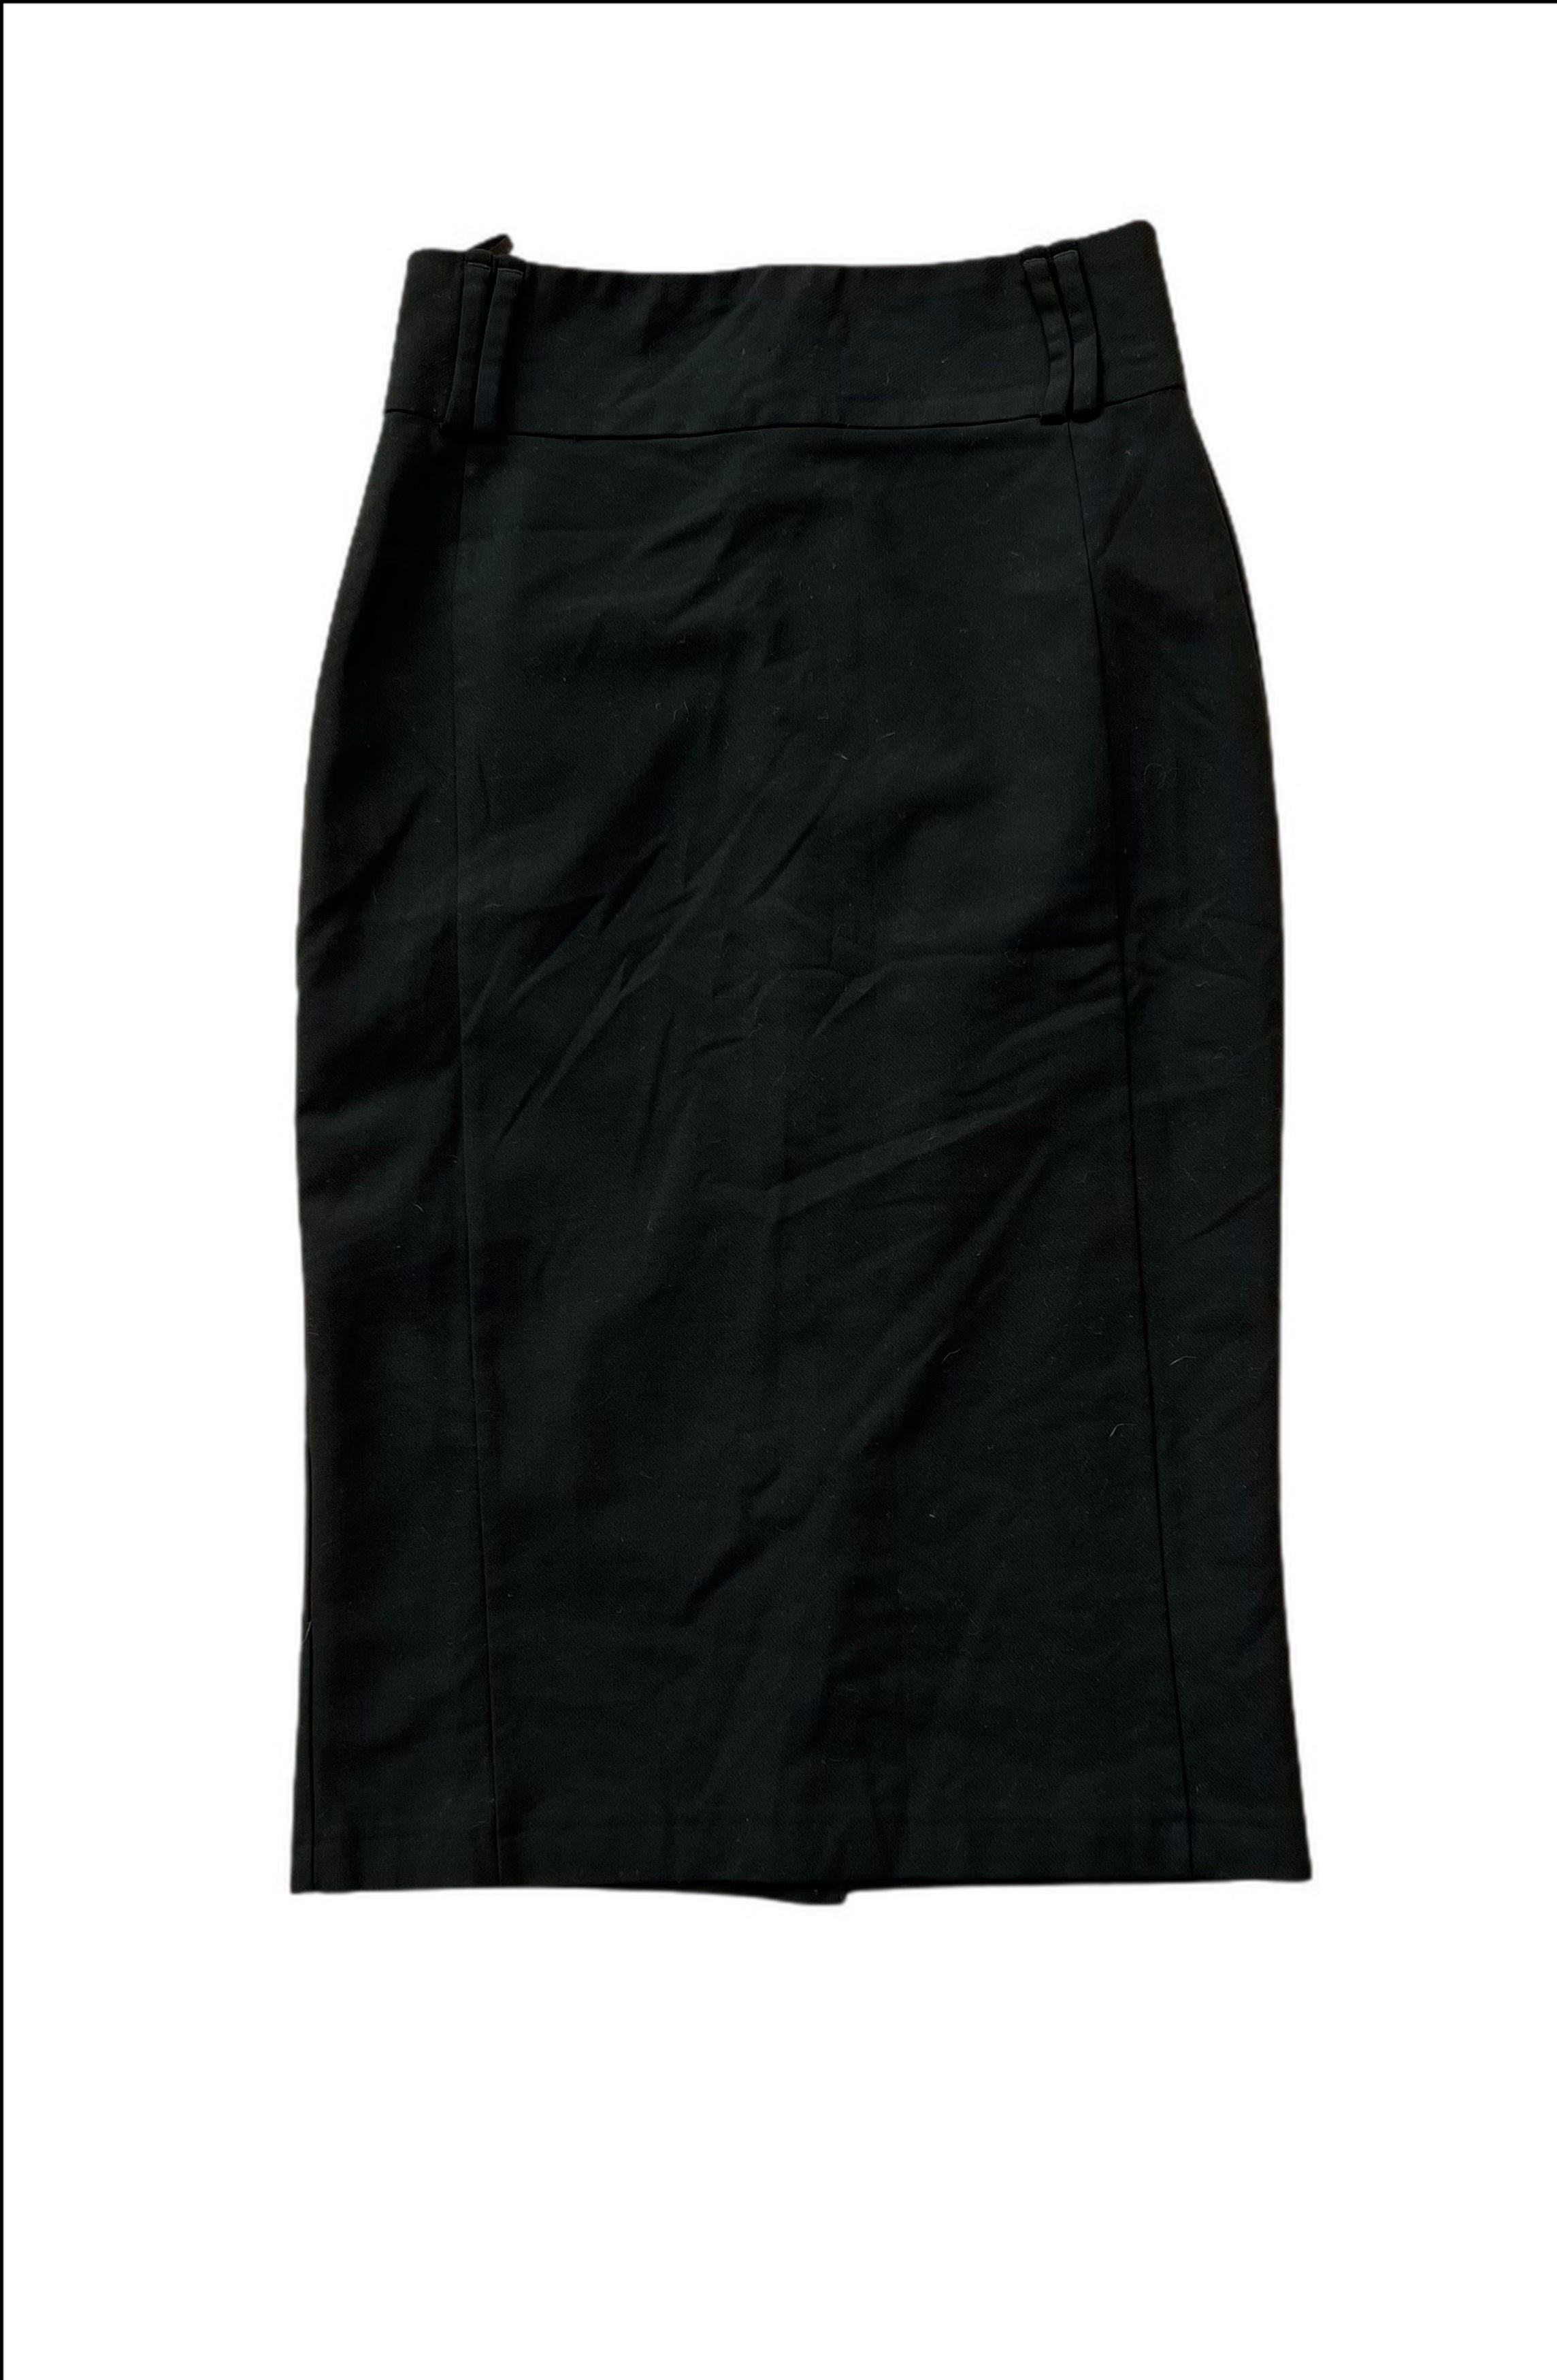 Pencil Skirt with buttins slit detail